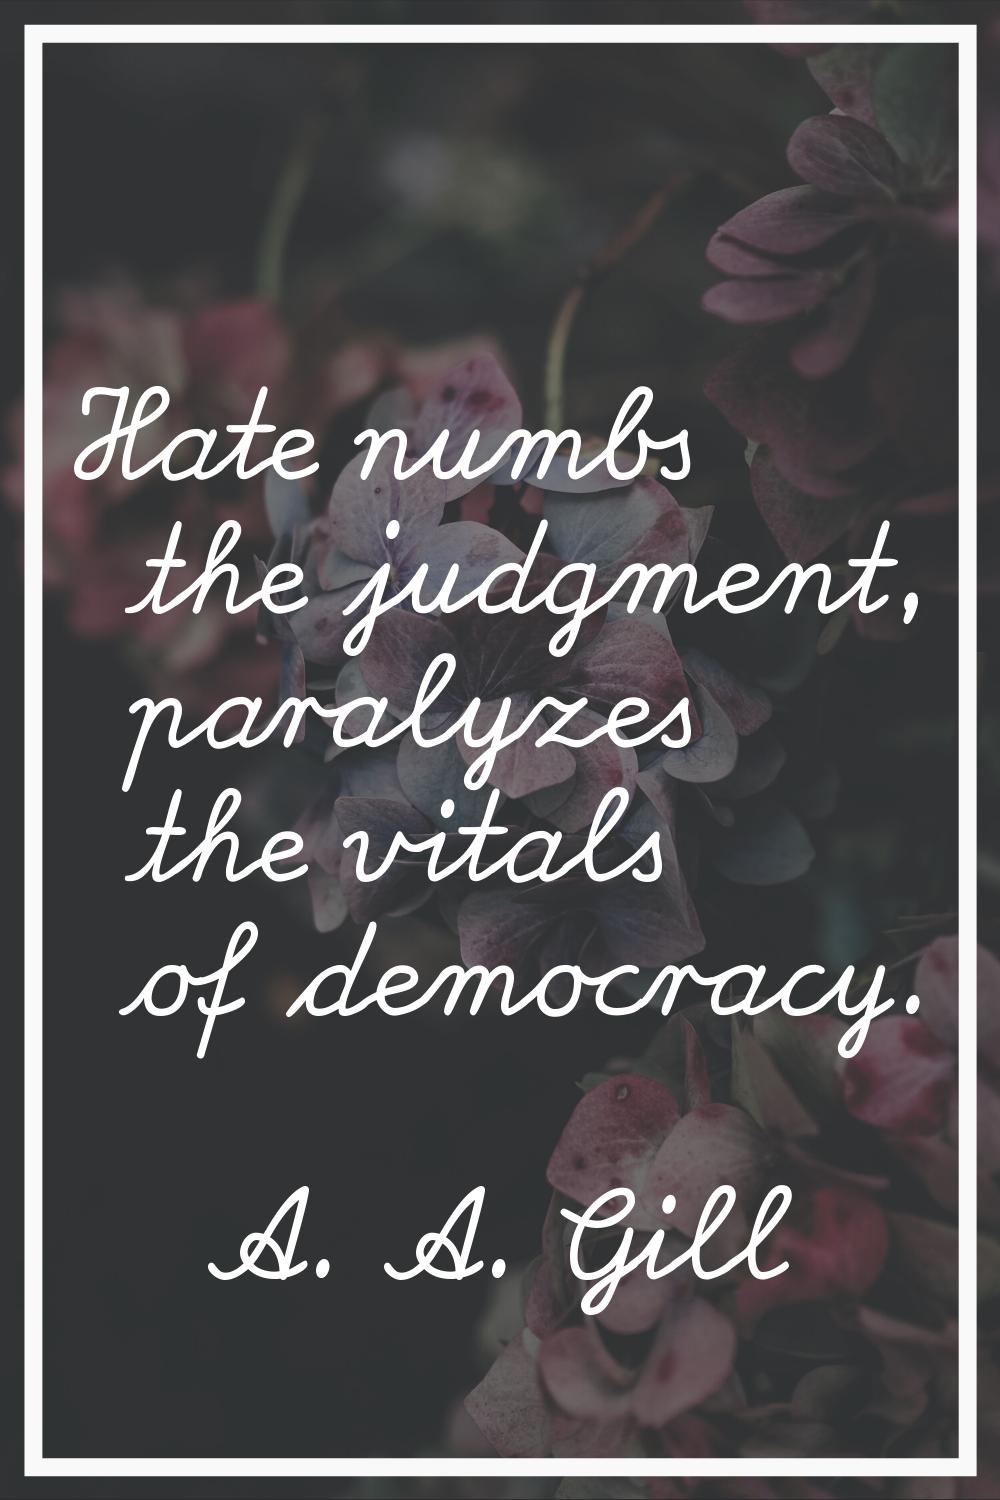 Hate numbs the judgment, paralyzes the vitals of democracy.